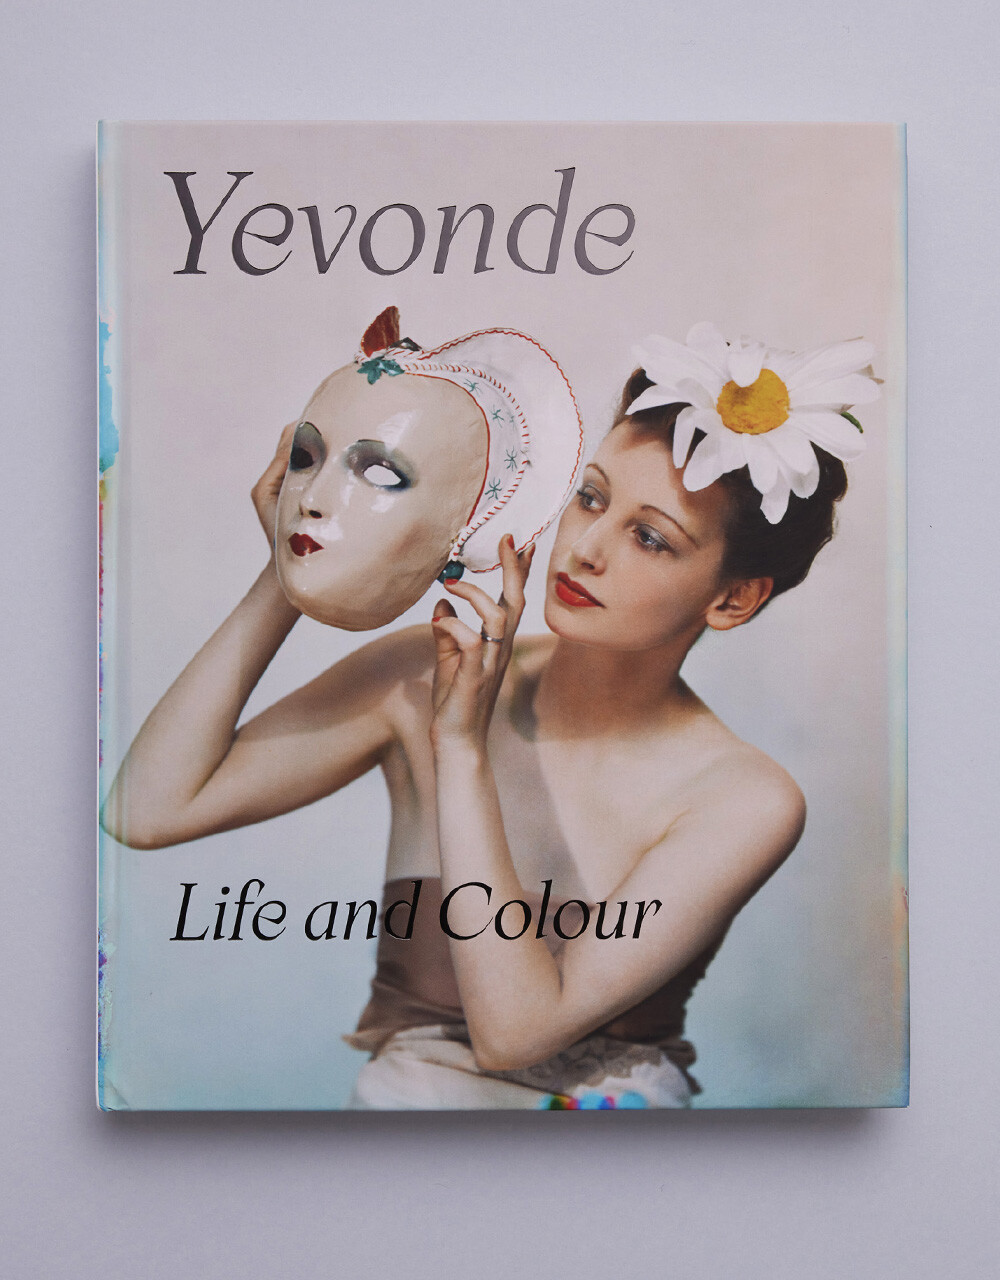 Yevonde – Life and Colour